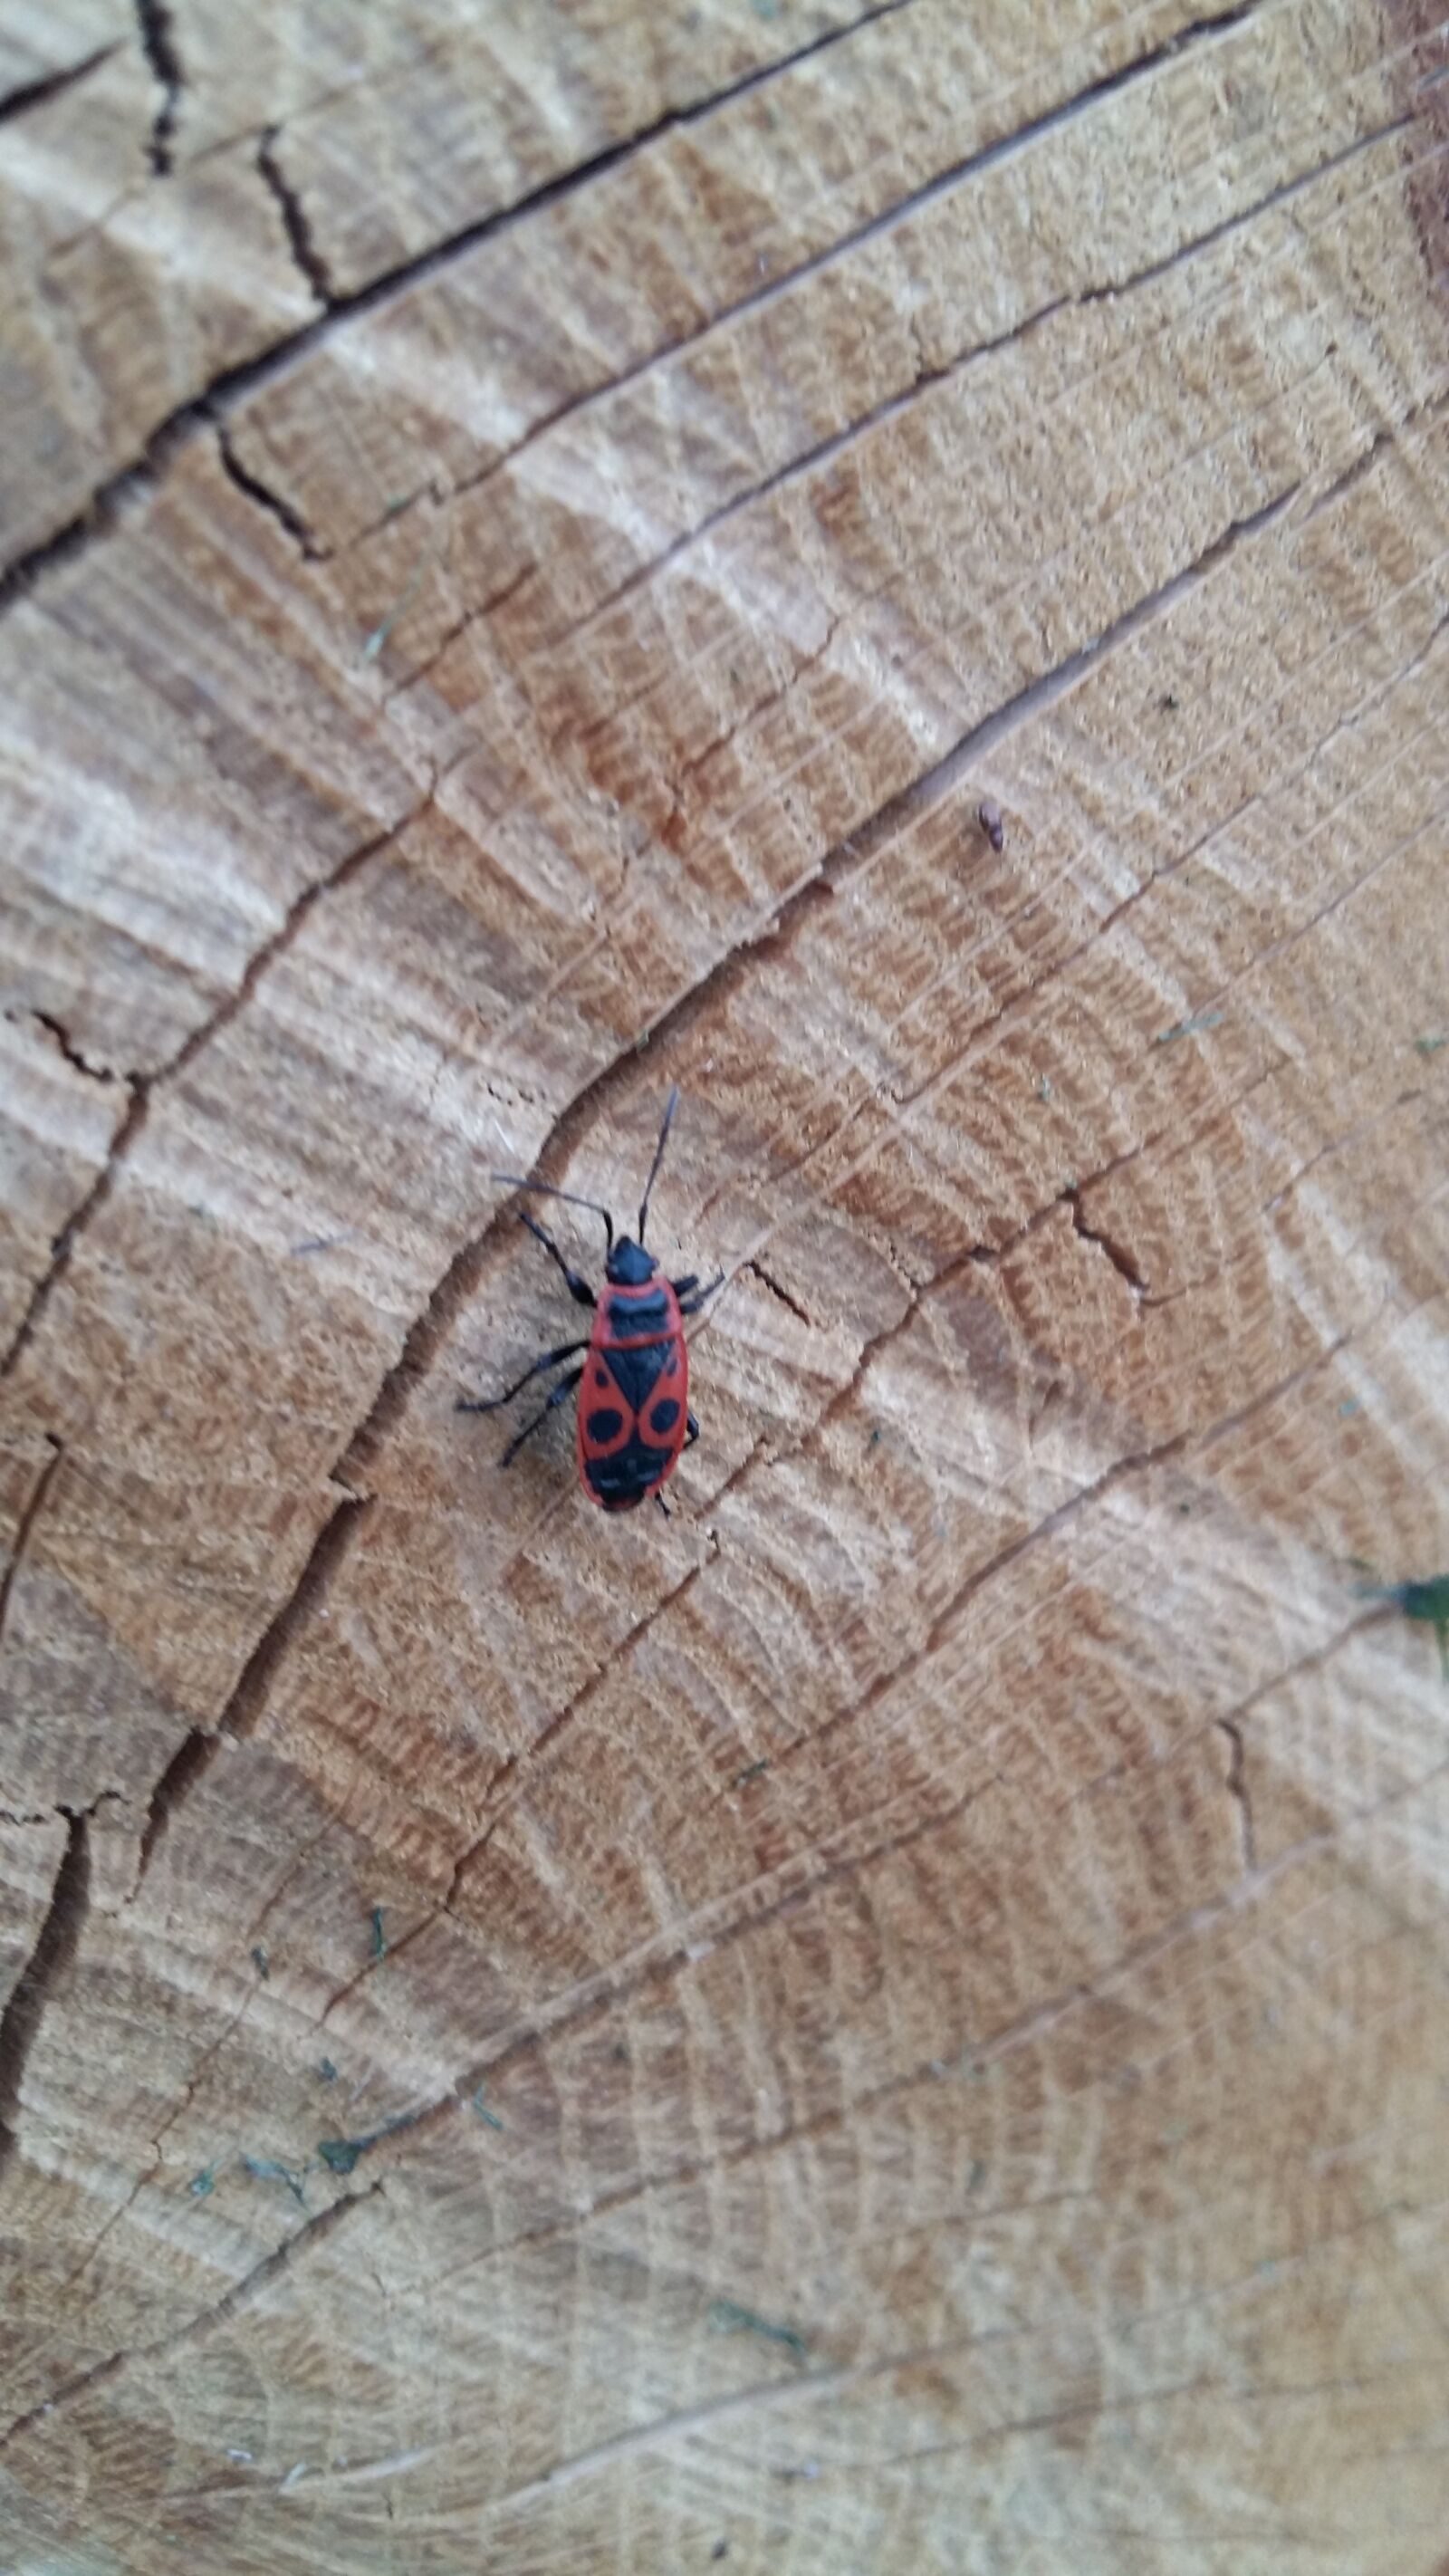 Samsung Galaxy A5 sample photo. Nature, wood, insect photography